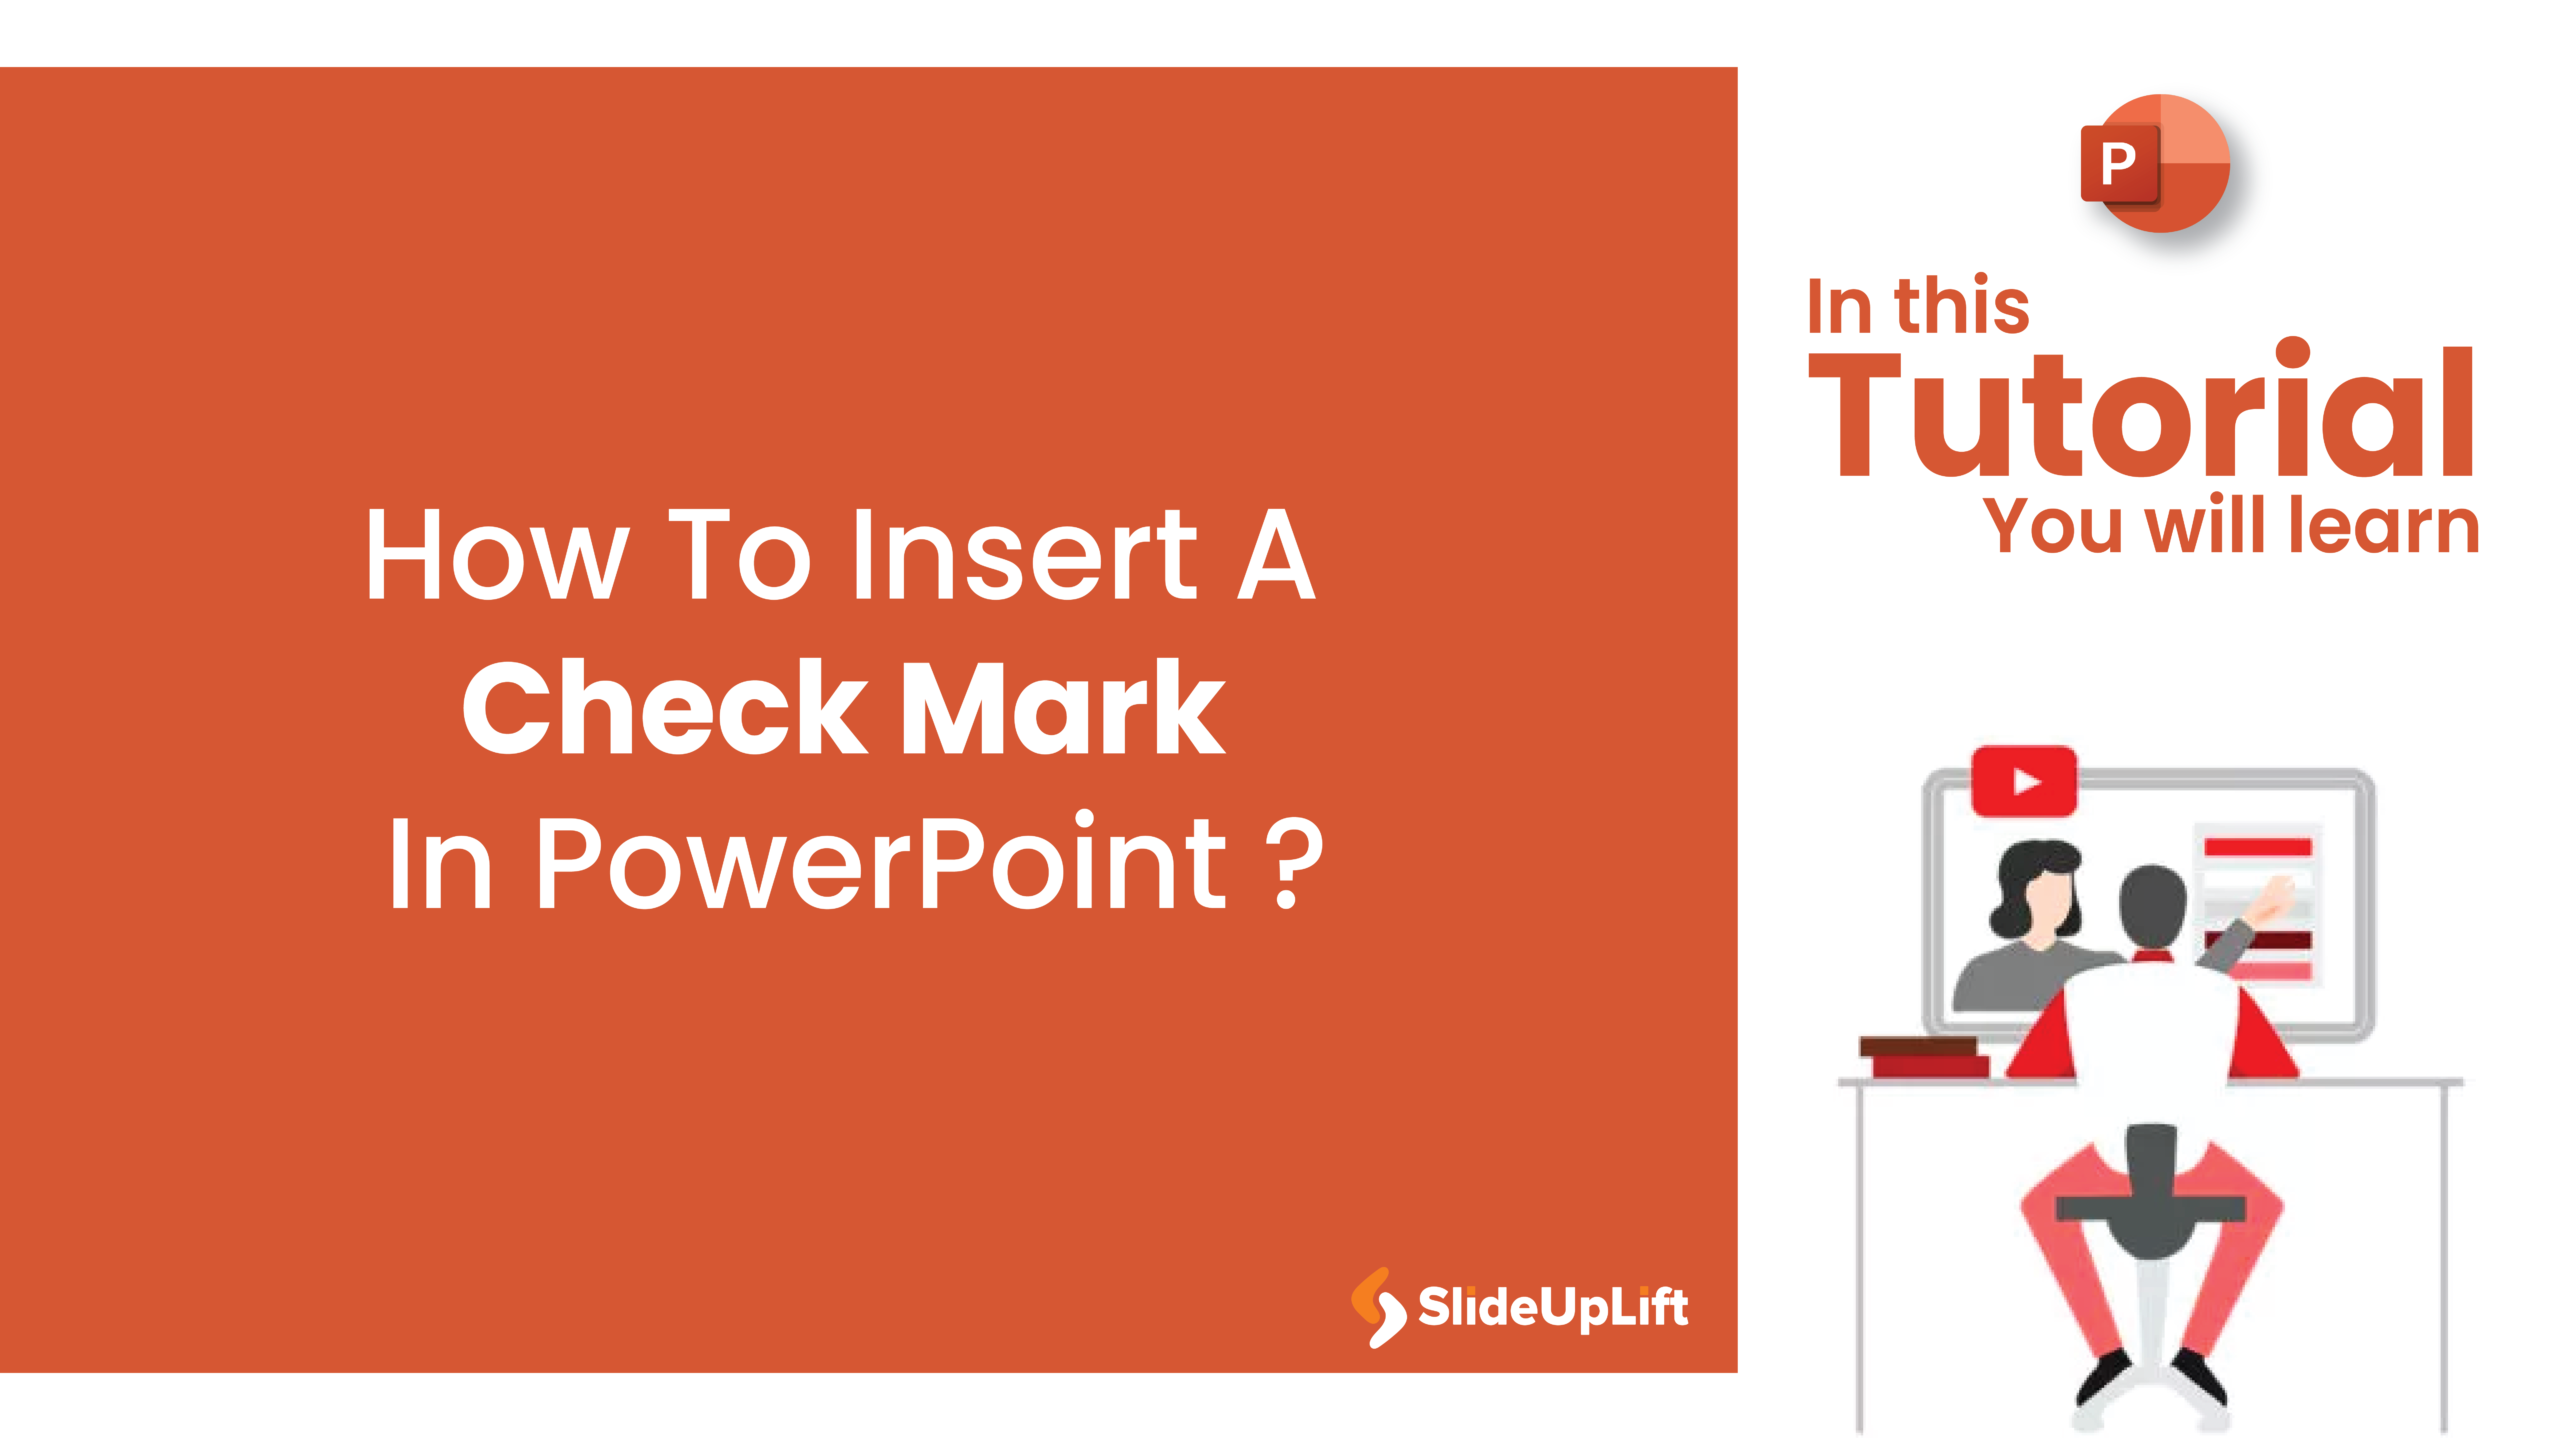 How to Insert a Checkmark in PowerPoint